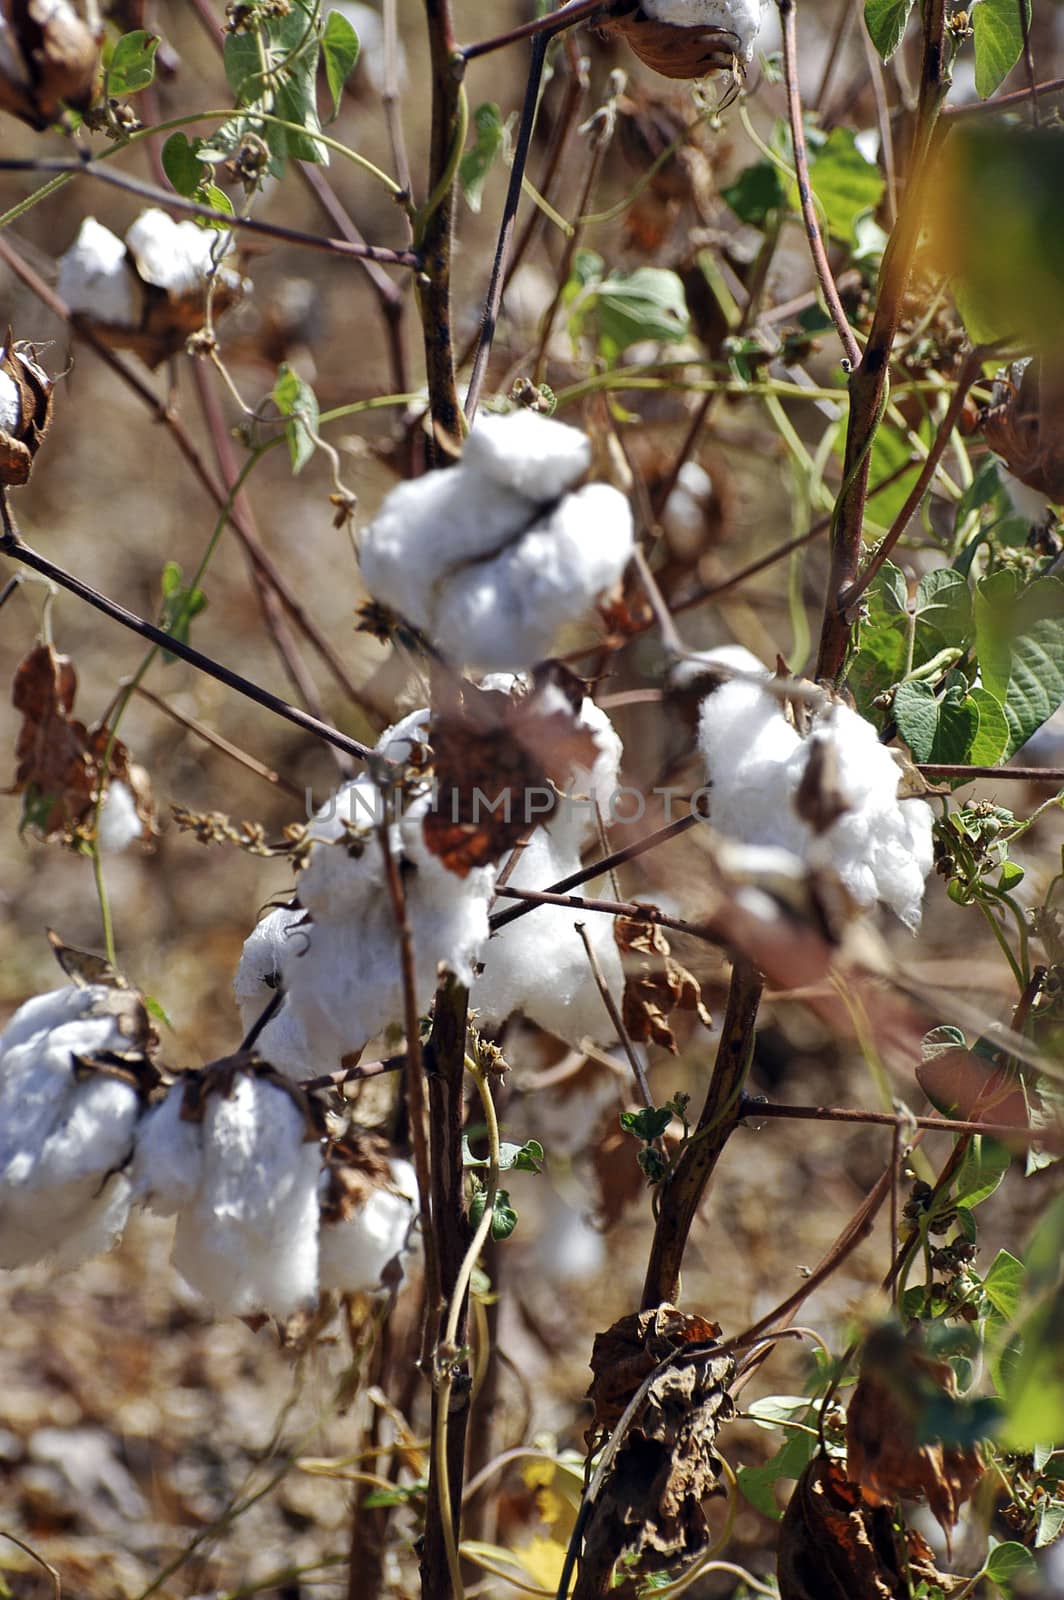 Cotton flowers by gillespaire